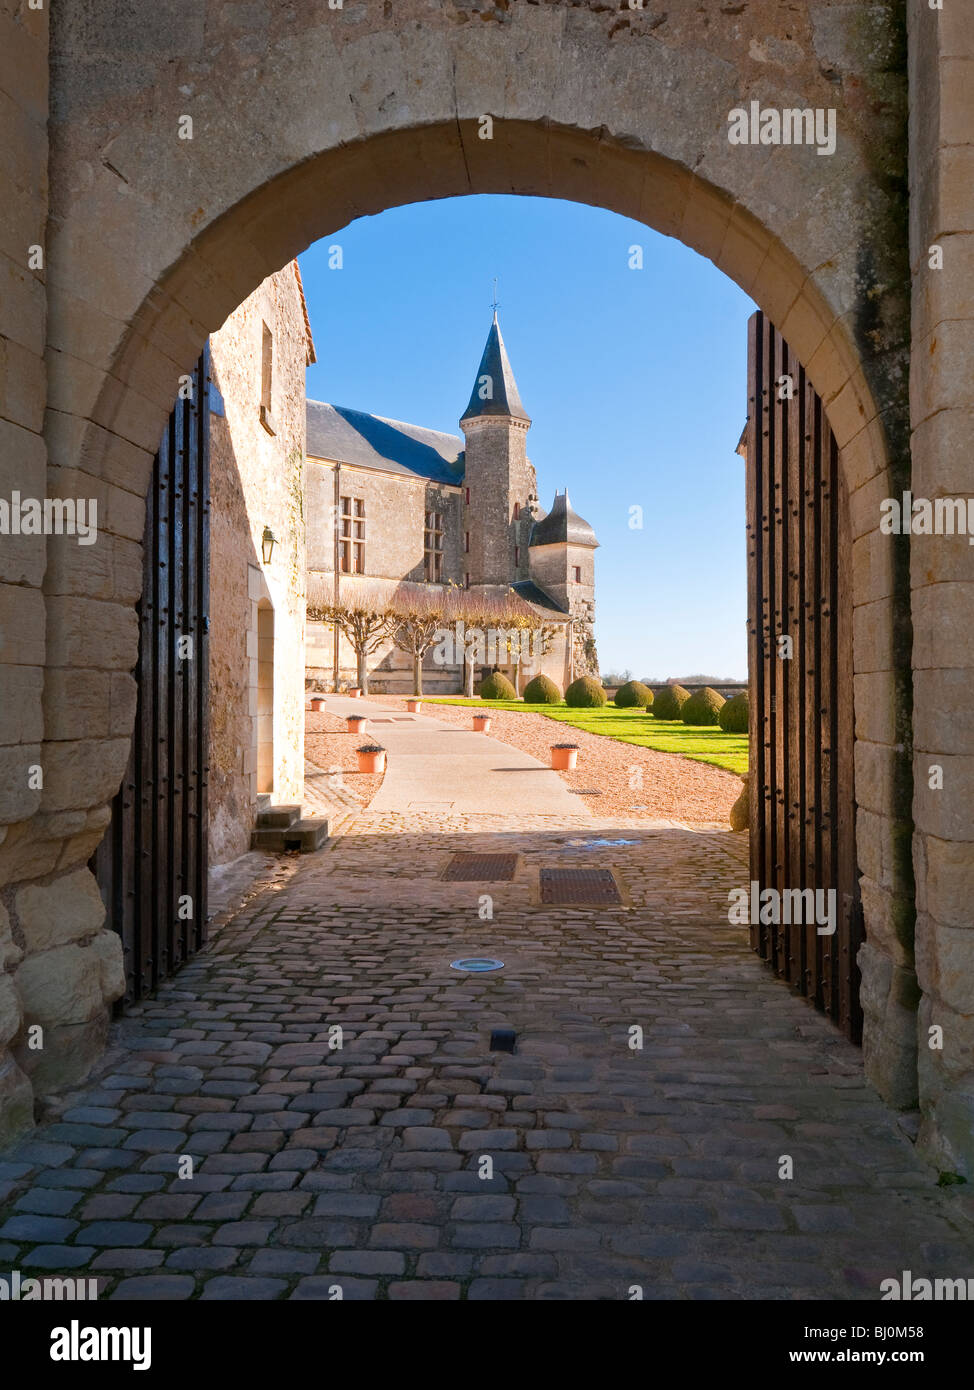 Chateau Inner Courtyard, Le Grand-Pressigny, sud-Touraine, France. Stock Photo